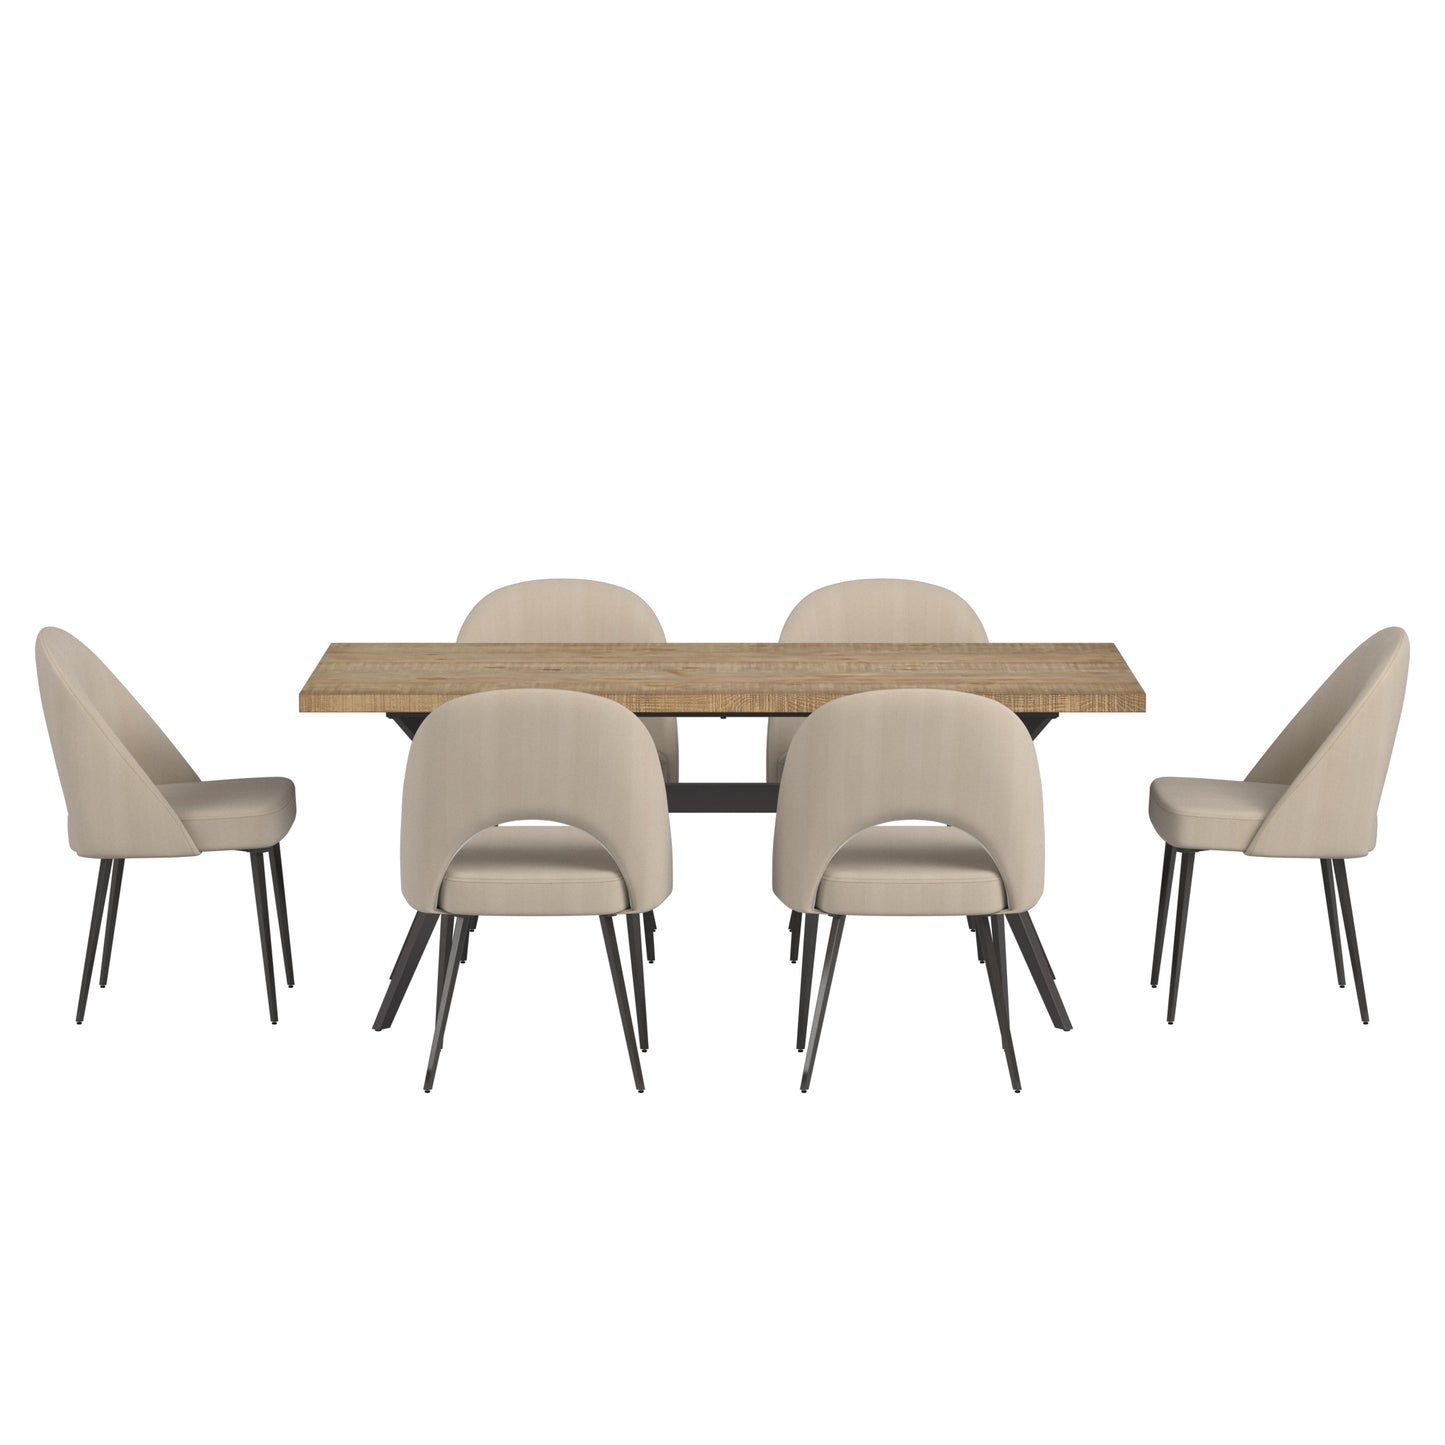 Wood Finish Dining Table with Upholstered Chairs Set - Line Pine Finish Table and Beige Herringbone Fabric Chairs